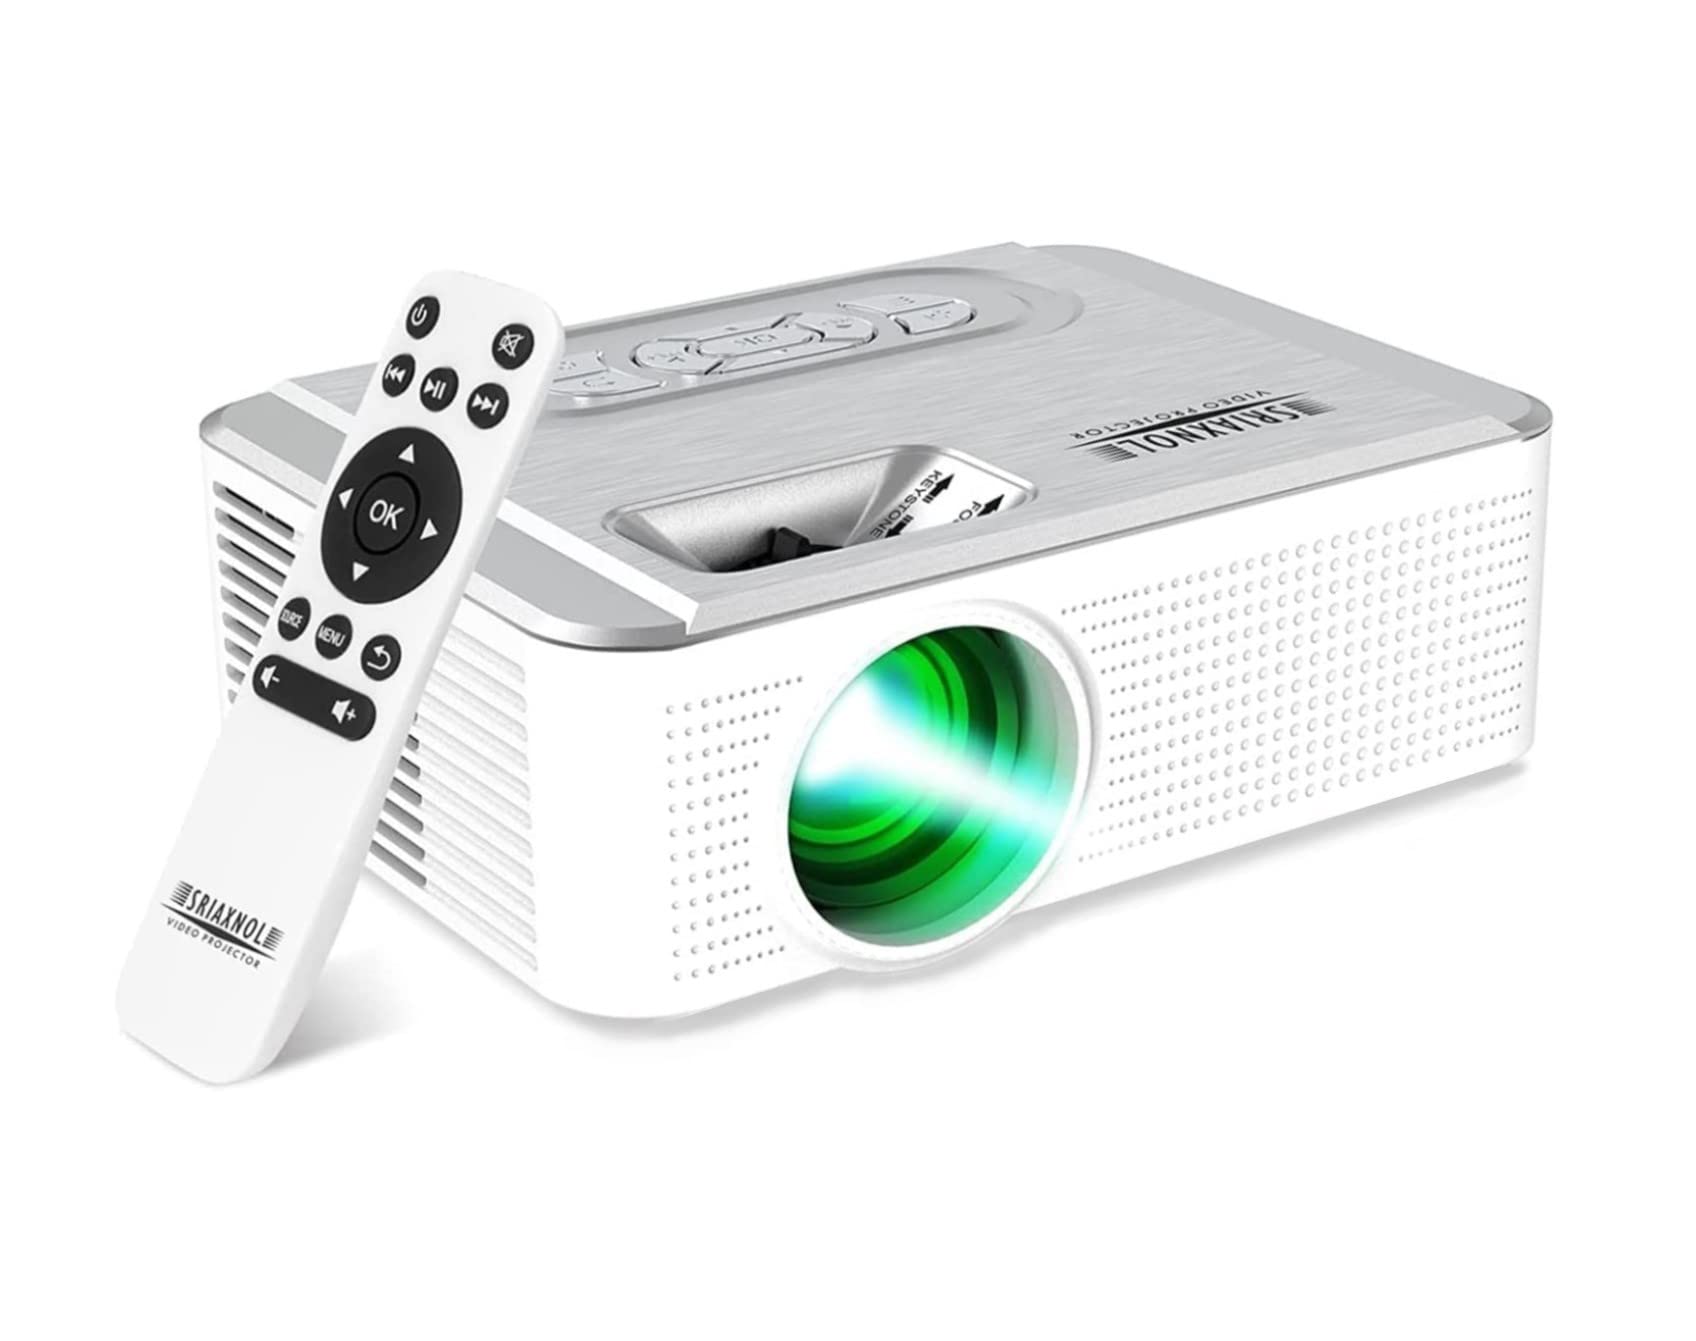 Mini Projector, Portable Movie Projector 8000 Lumens for Home Theater Outdoor Video Projectir 1080P Supported Compatible HDMI,VGA,USB,TF Card,Laptop TV Stick, Xbox Built-in Speaker